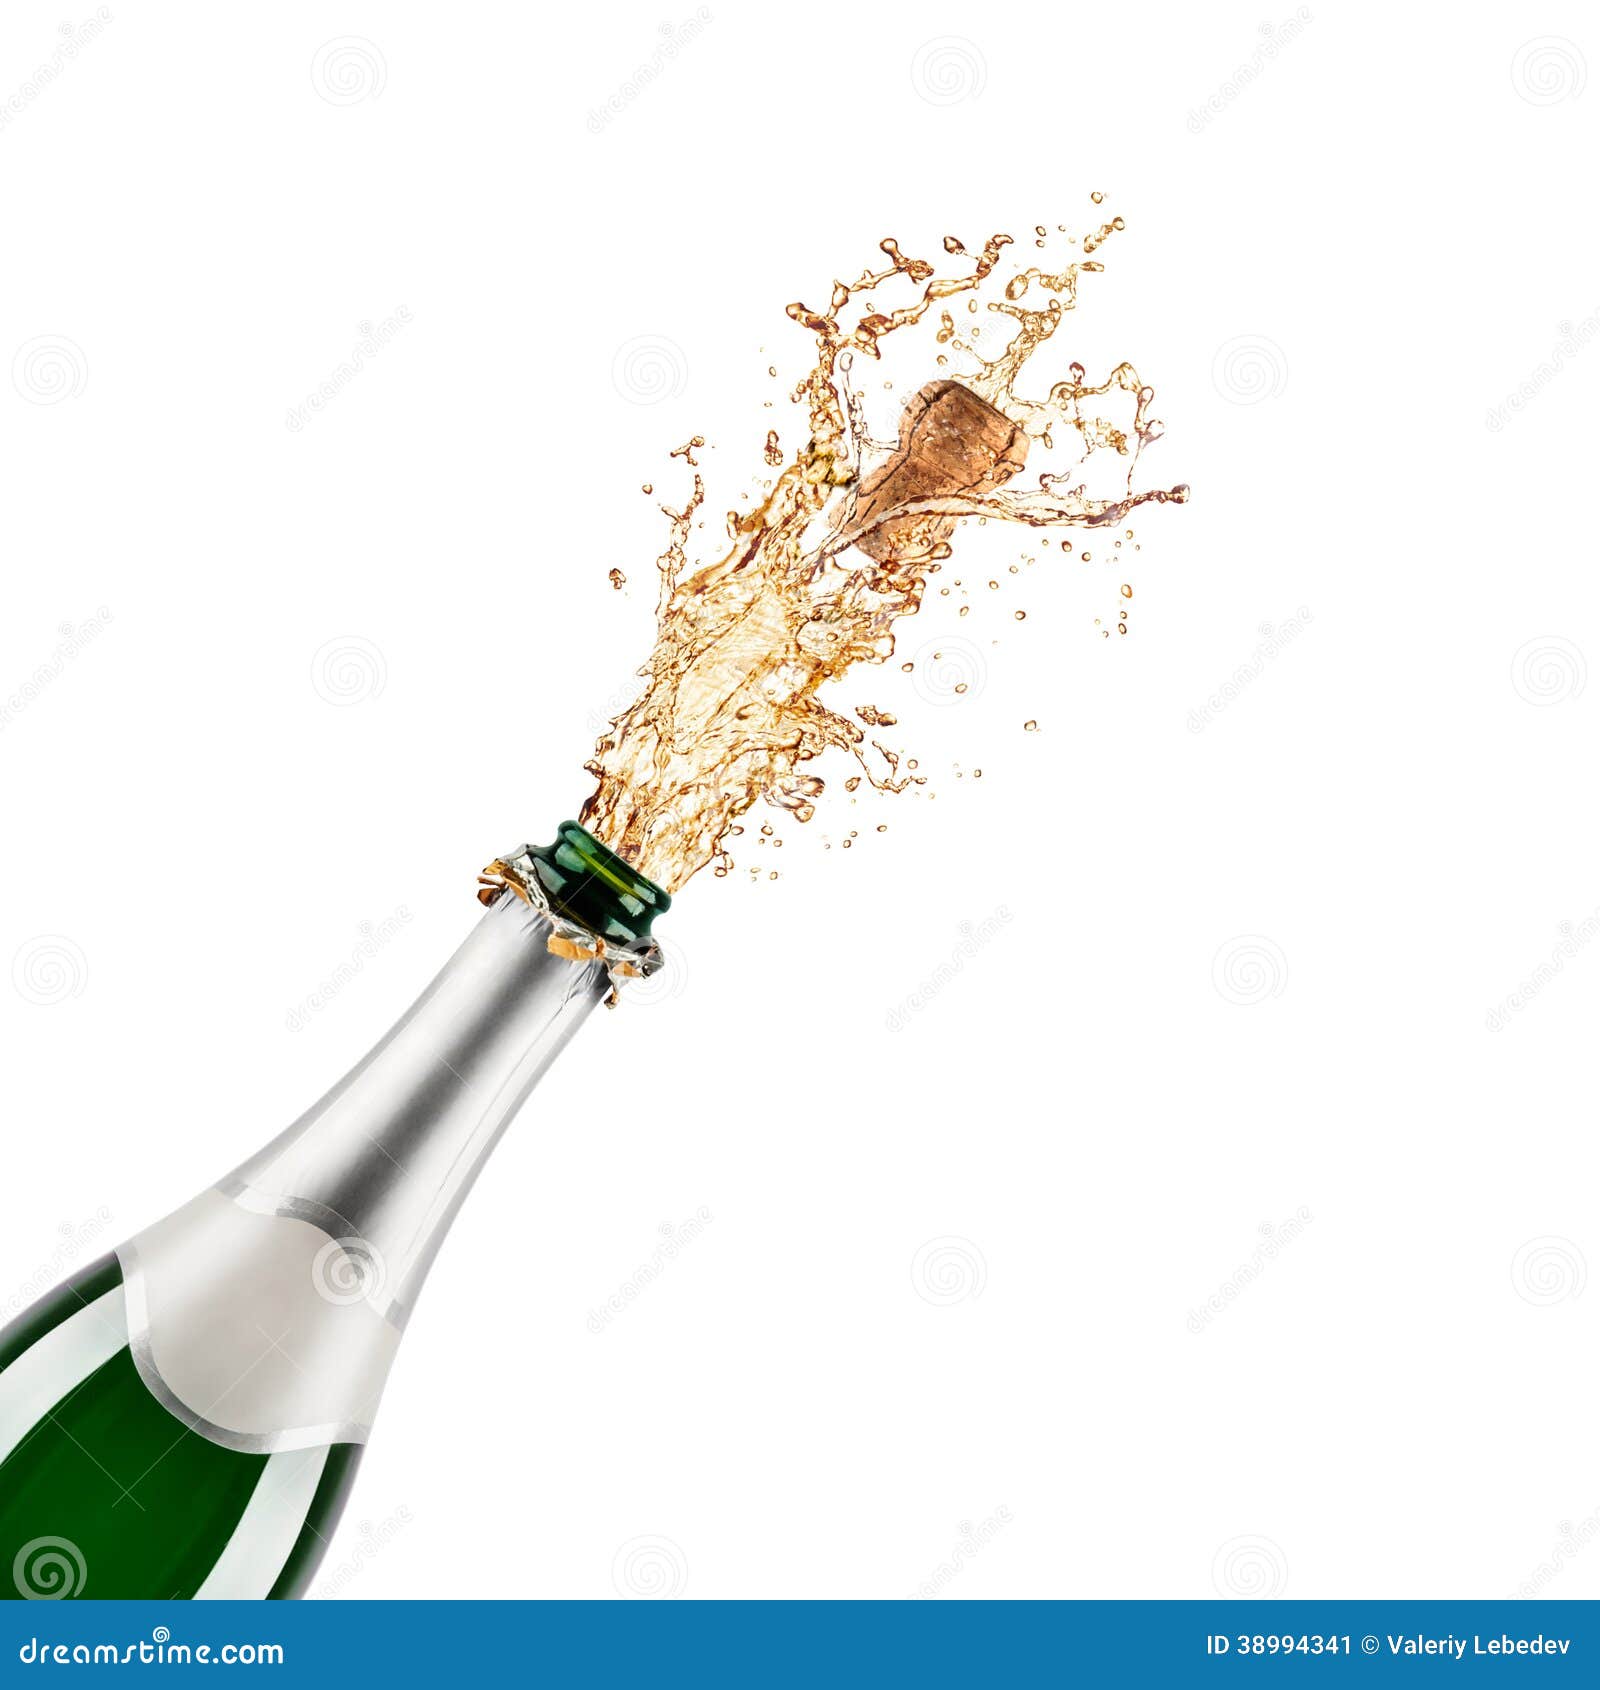 https://thumbs.dreamstime.com/z/bottle-champagne-beautiful-picture-38994341.jpg